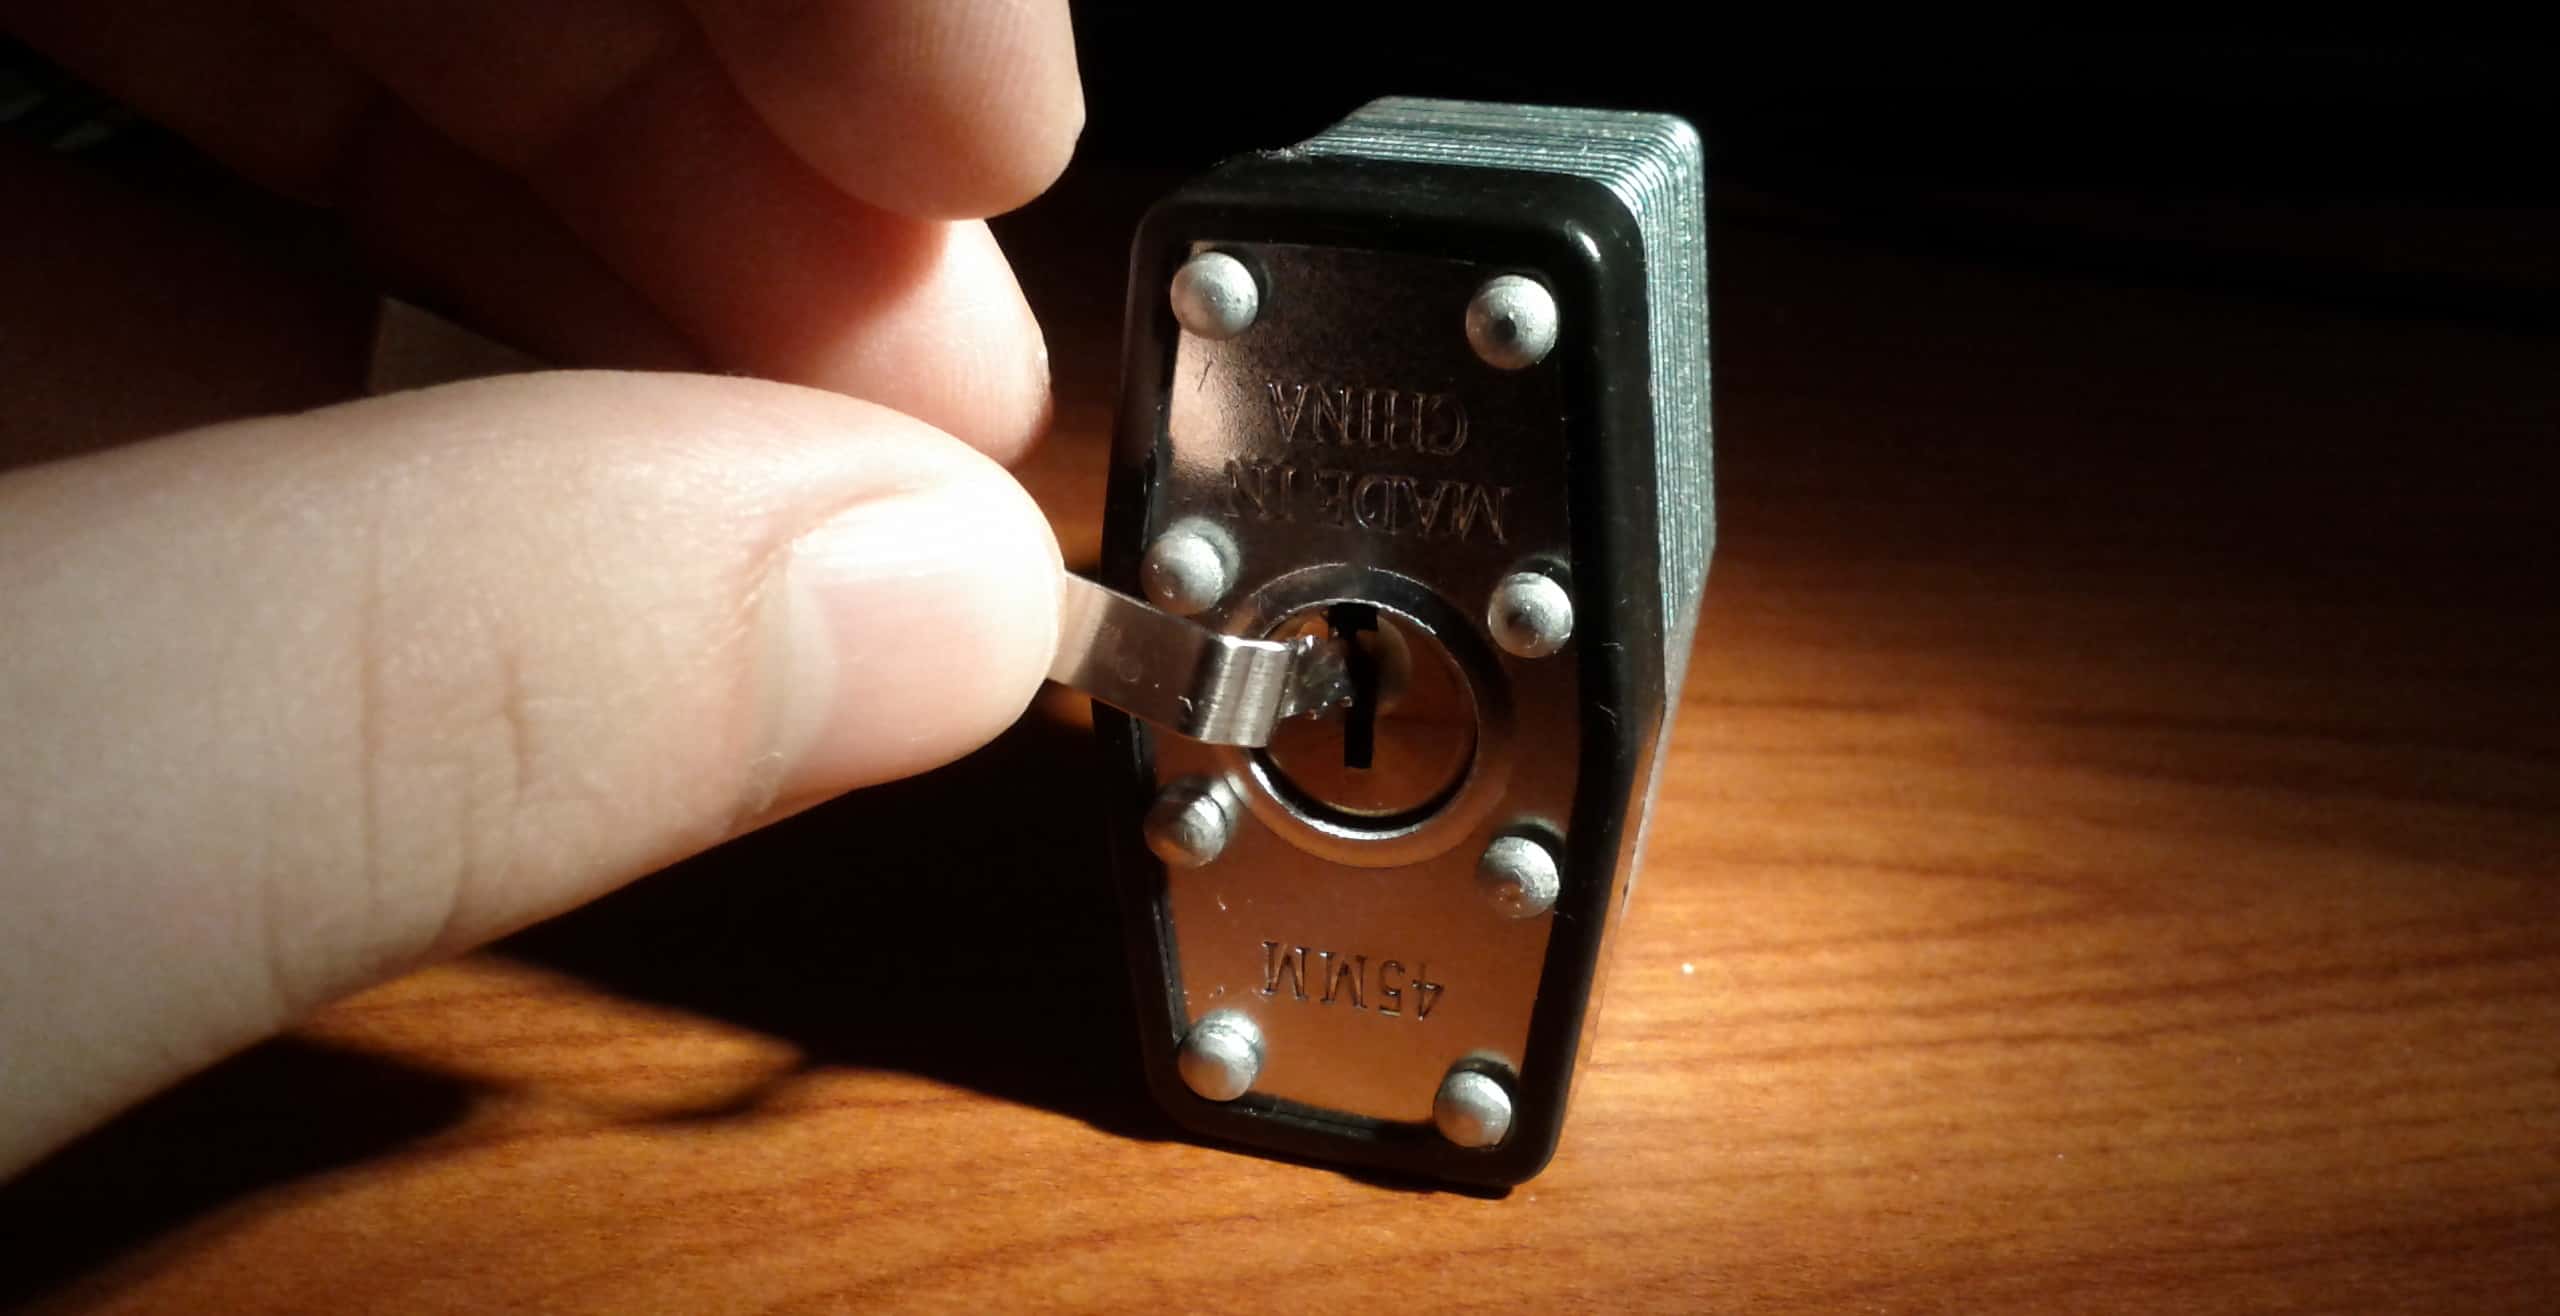 Apply Pressure - how to pick a lock